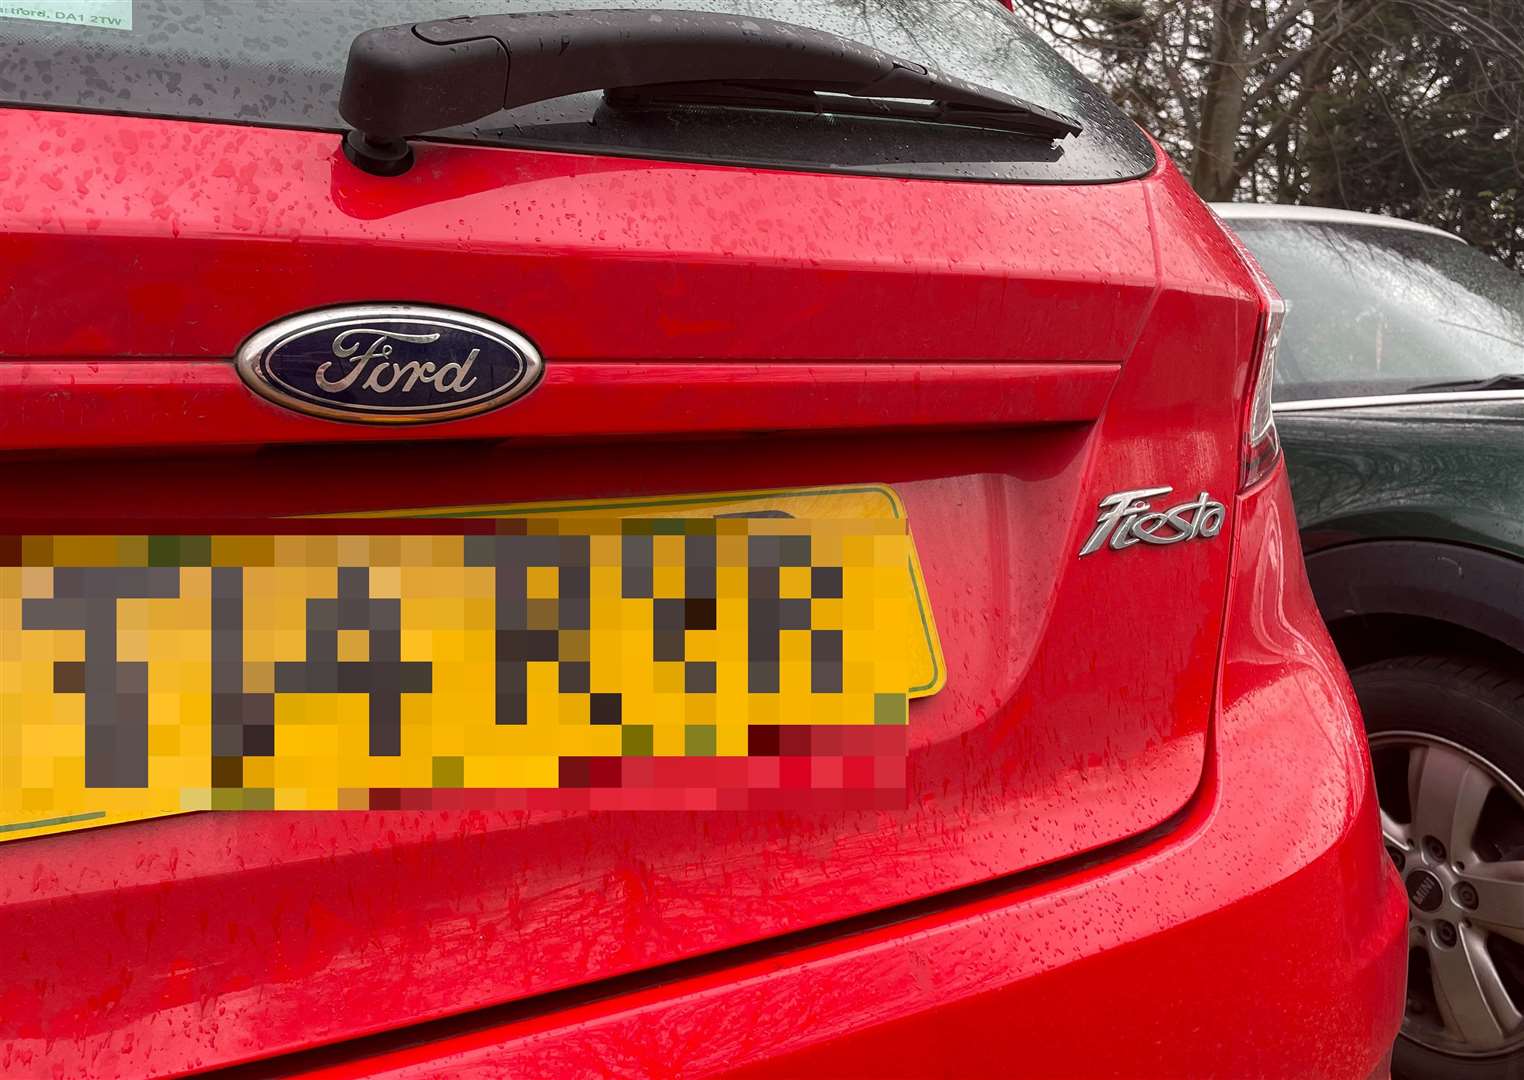 Ford Fiestas are one of the most targeted cars in the county